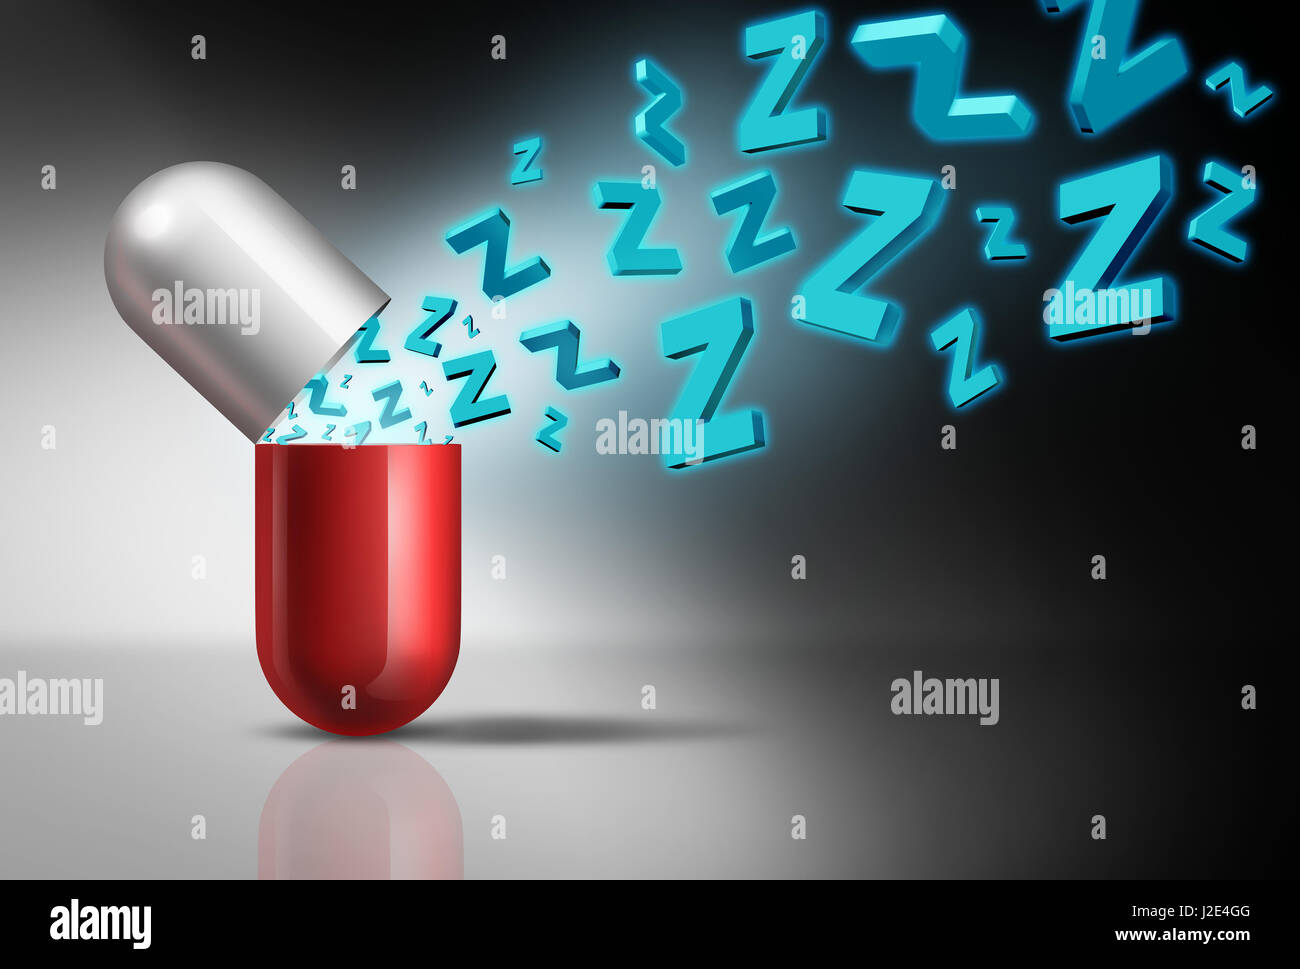 Sleeping pill symbol and insomnia medicine concept as a pharmaceutical sleep prescription medication with the letter z emerging as a sleeping aid. Stock Photo